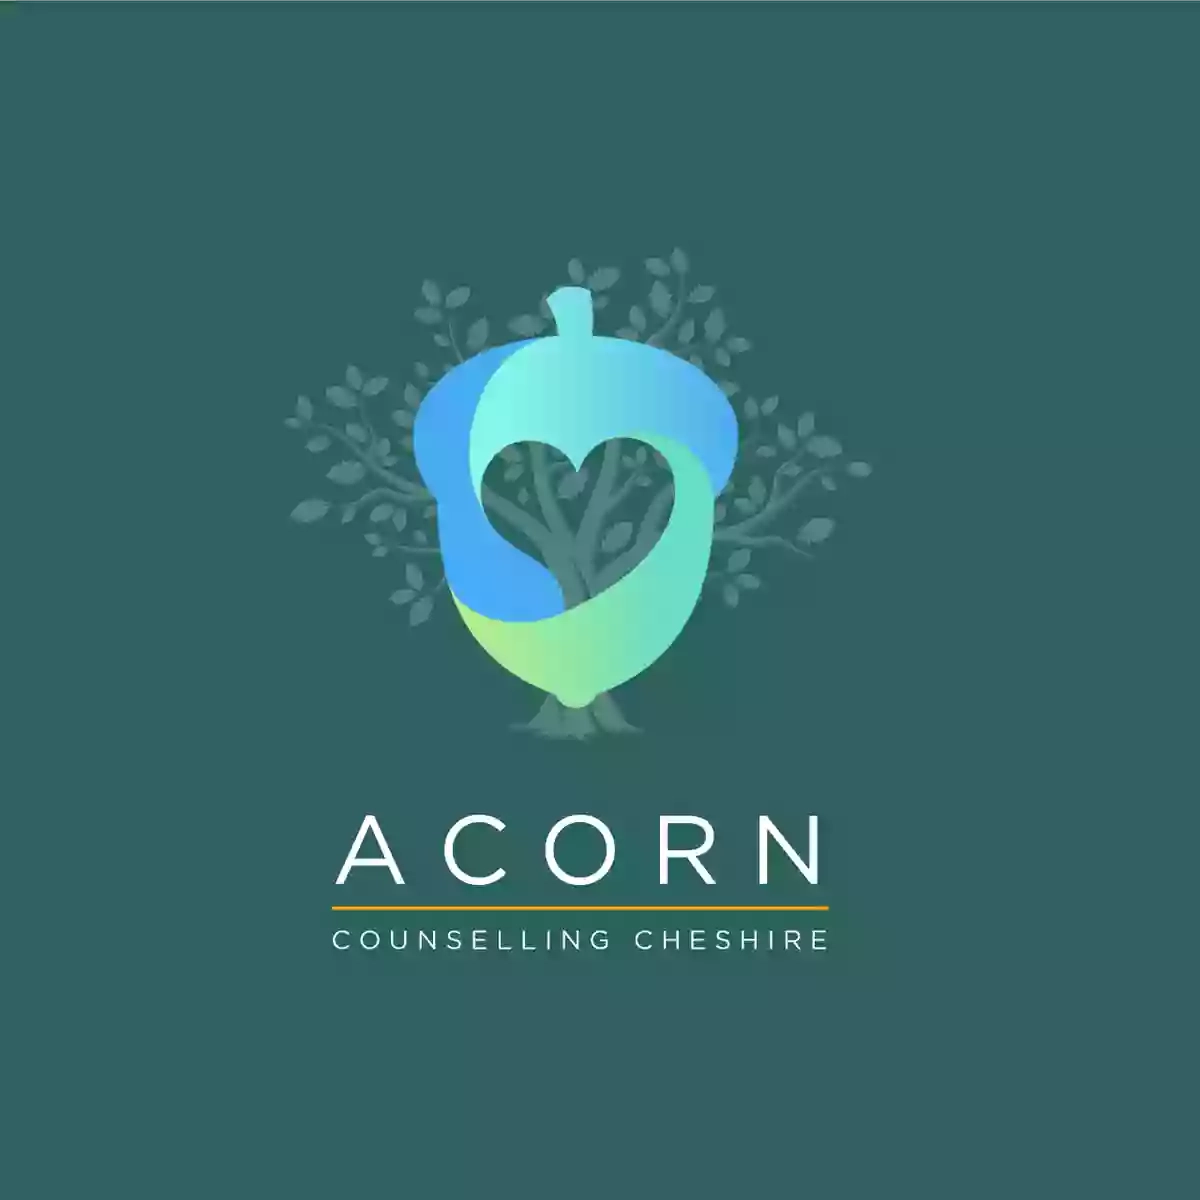 Acorn Counselling Cheshire